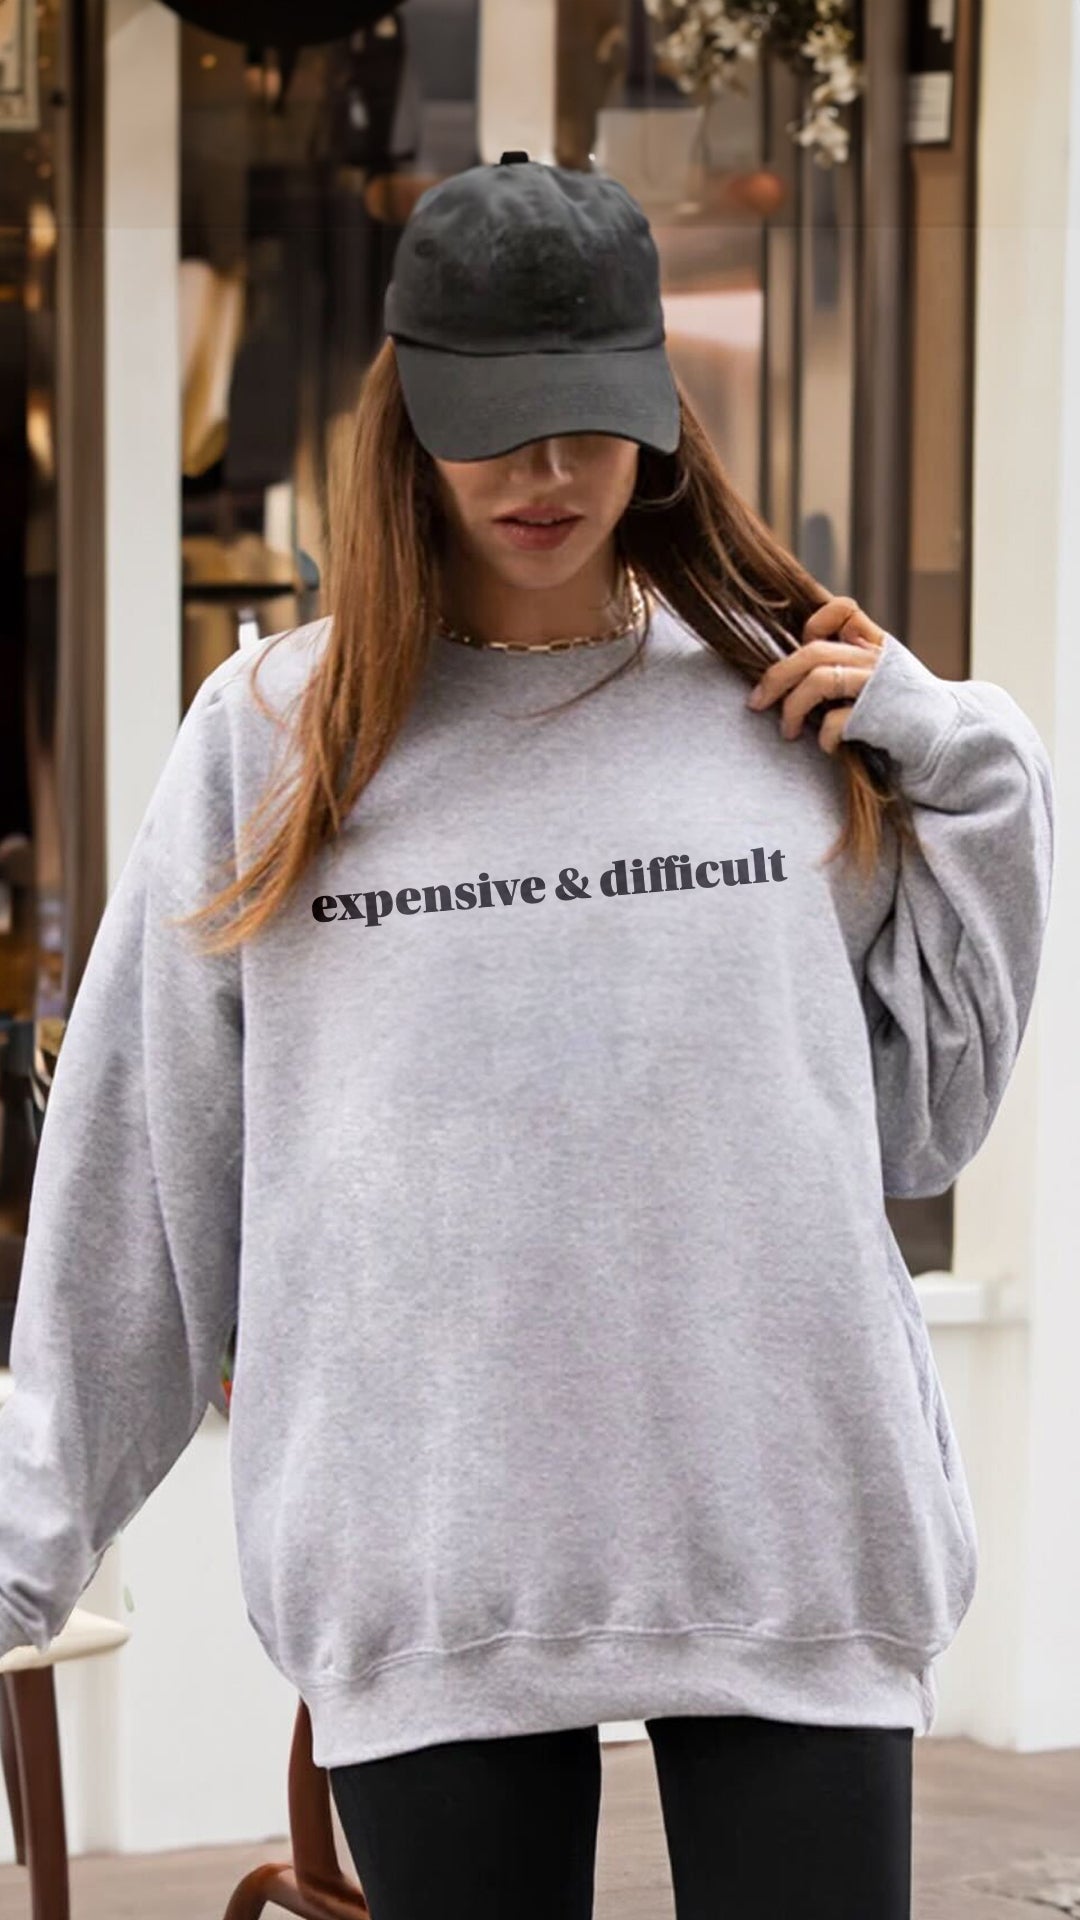 Expensive and Difficult Crewneck